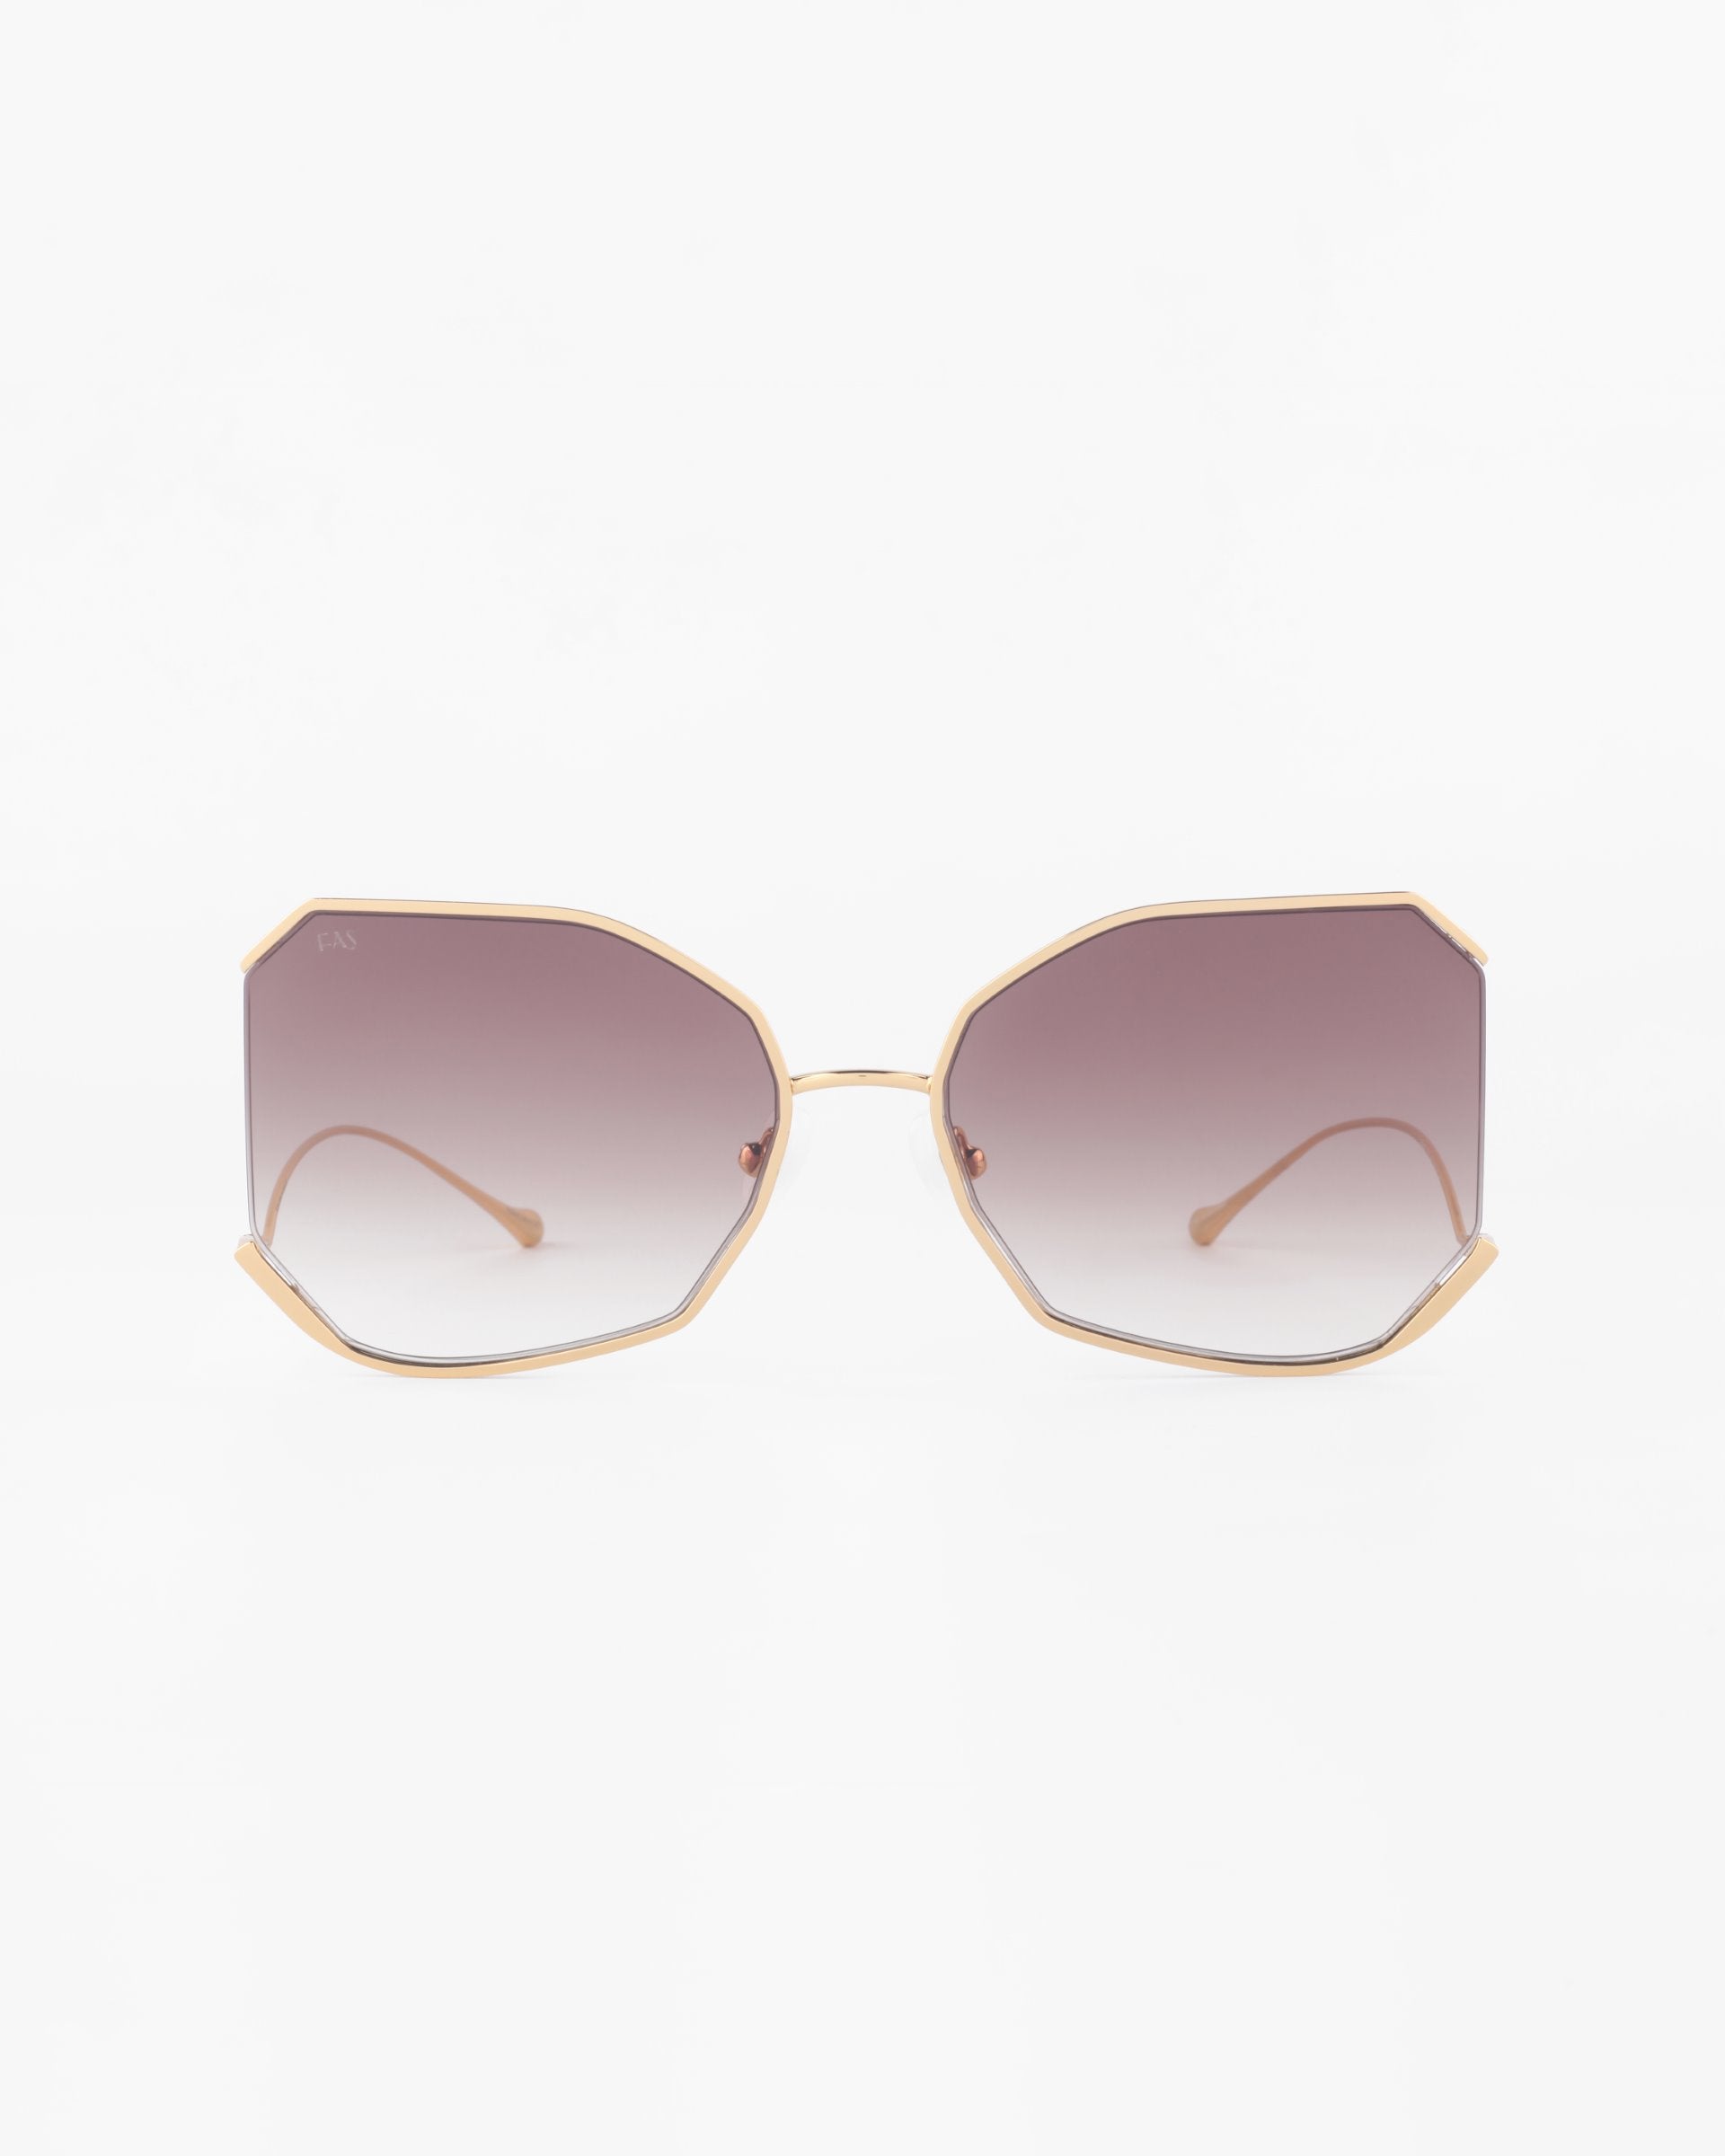 Front view of a pair of For Art's Sake® Painter sunglasses with gradient lenses and a geometric, angular frame in gold-plated stainless steel. The ultra-lightweight Nylon lenses transition from a dark tint at the top to a lighter tint at the bottom, offering 100% UVA & UVB protection. The temple arms are thin with matching gold accents.